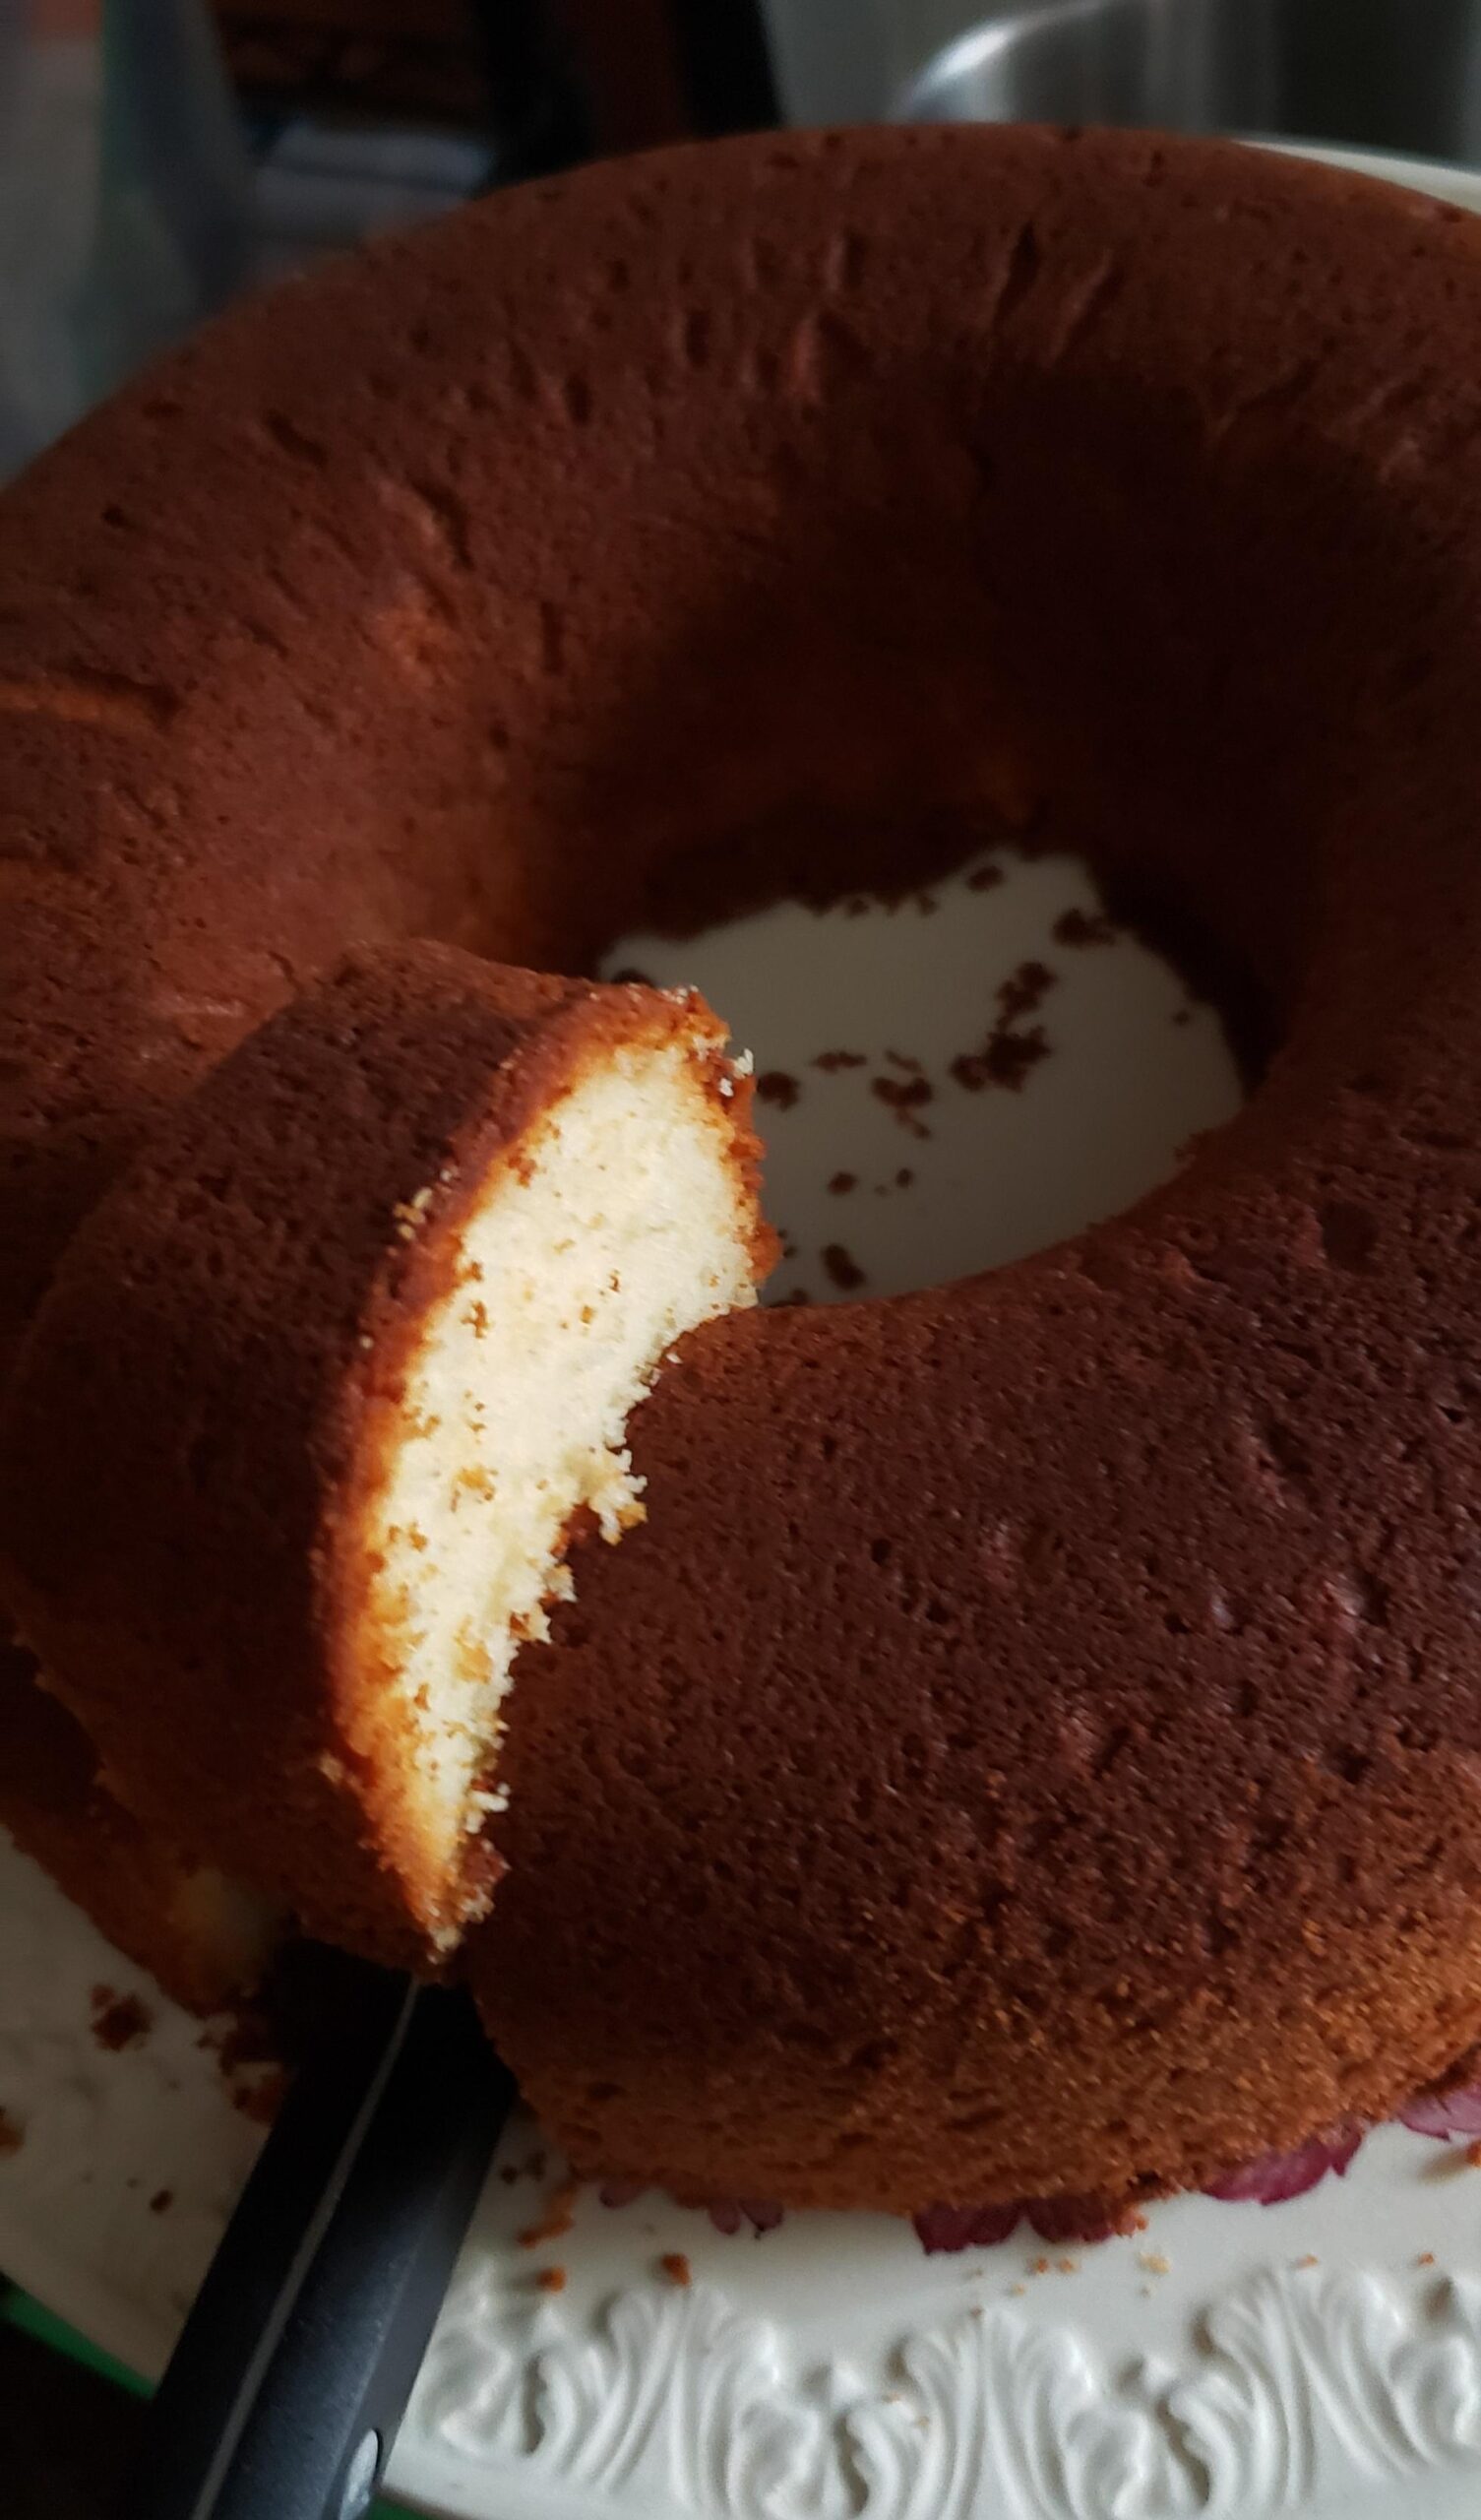  The perfect slice of dense and buttery pound cake awaits you!